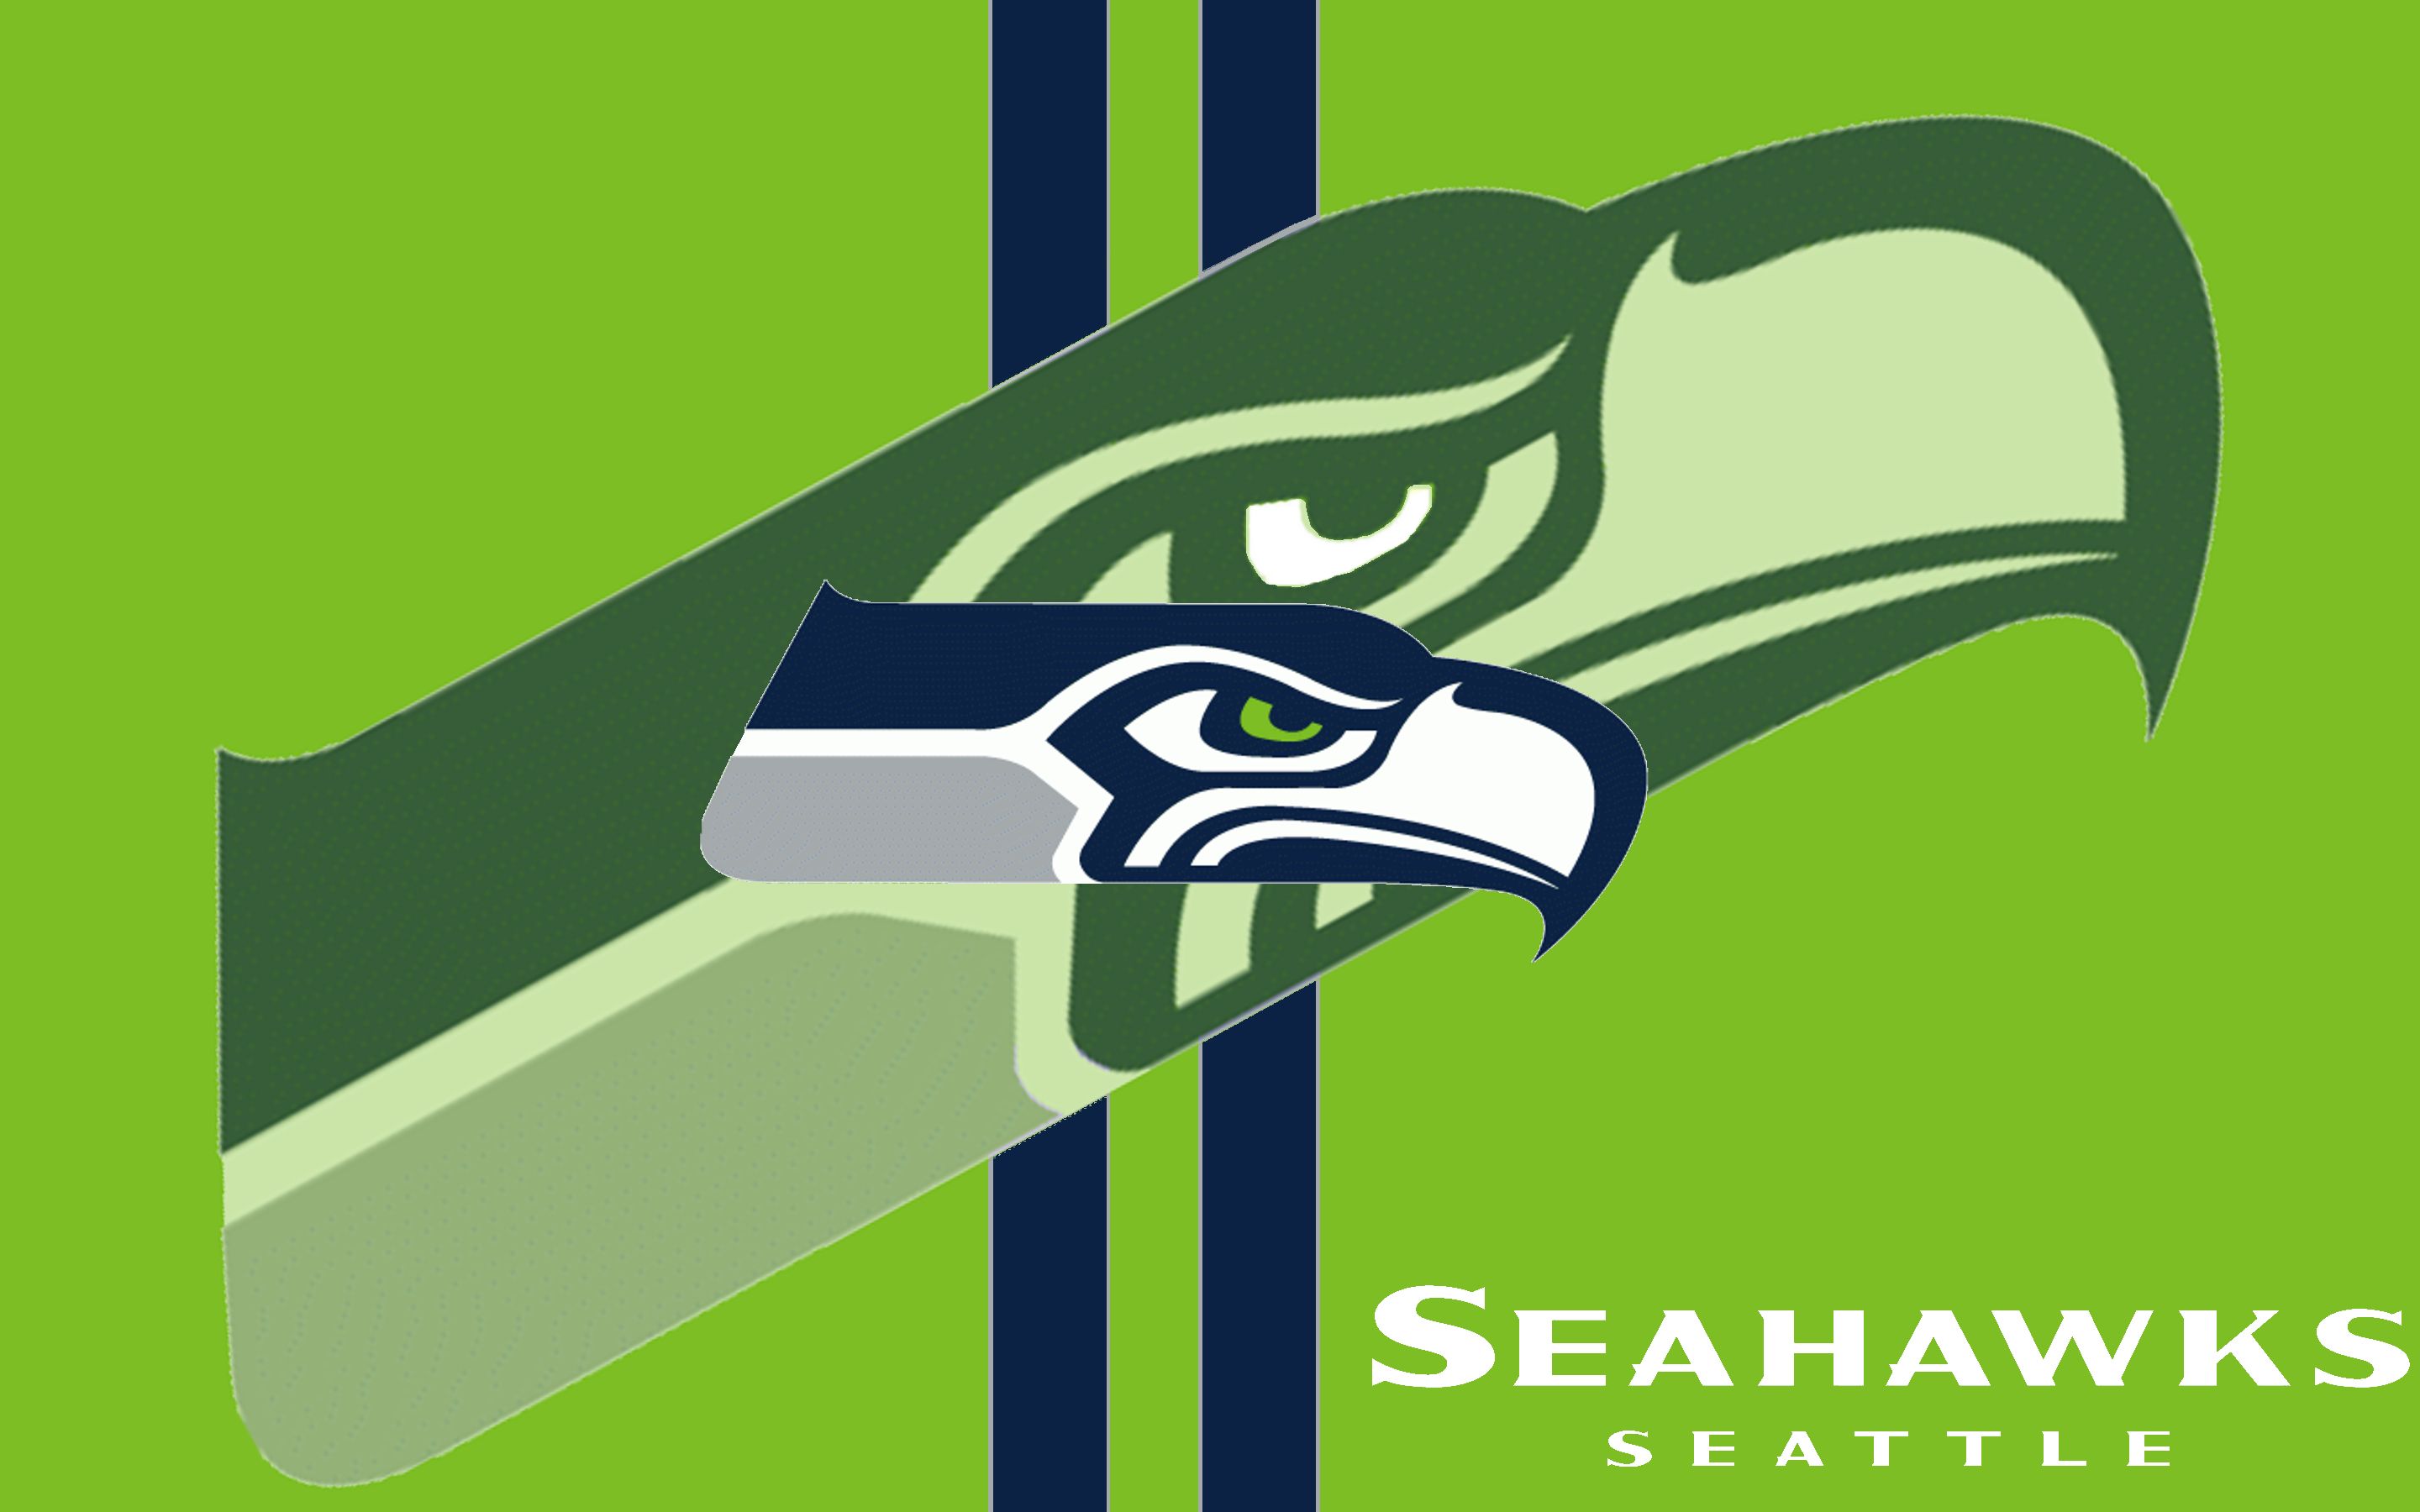 Wallpaper for mobile devices seattle seahawks, sports